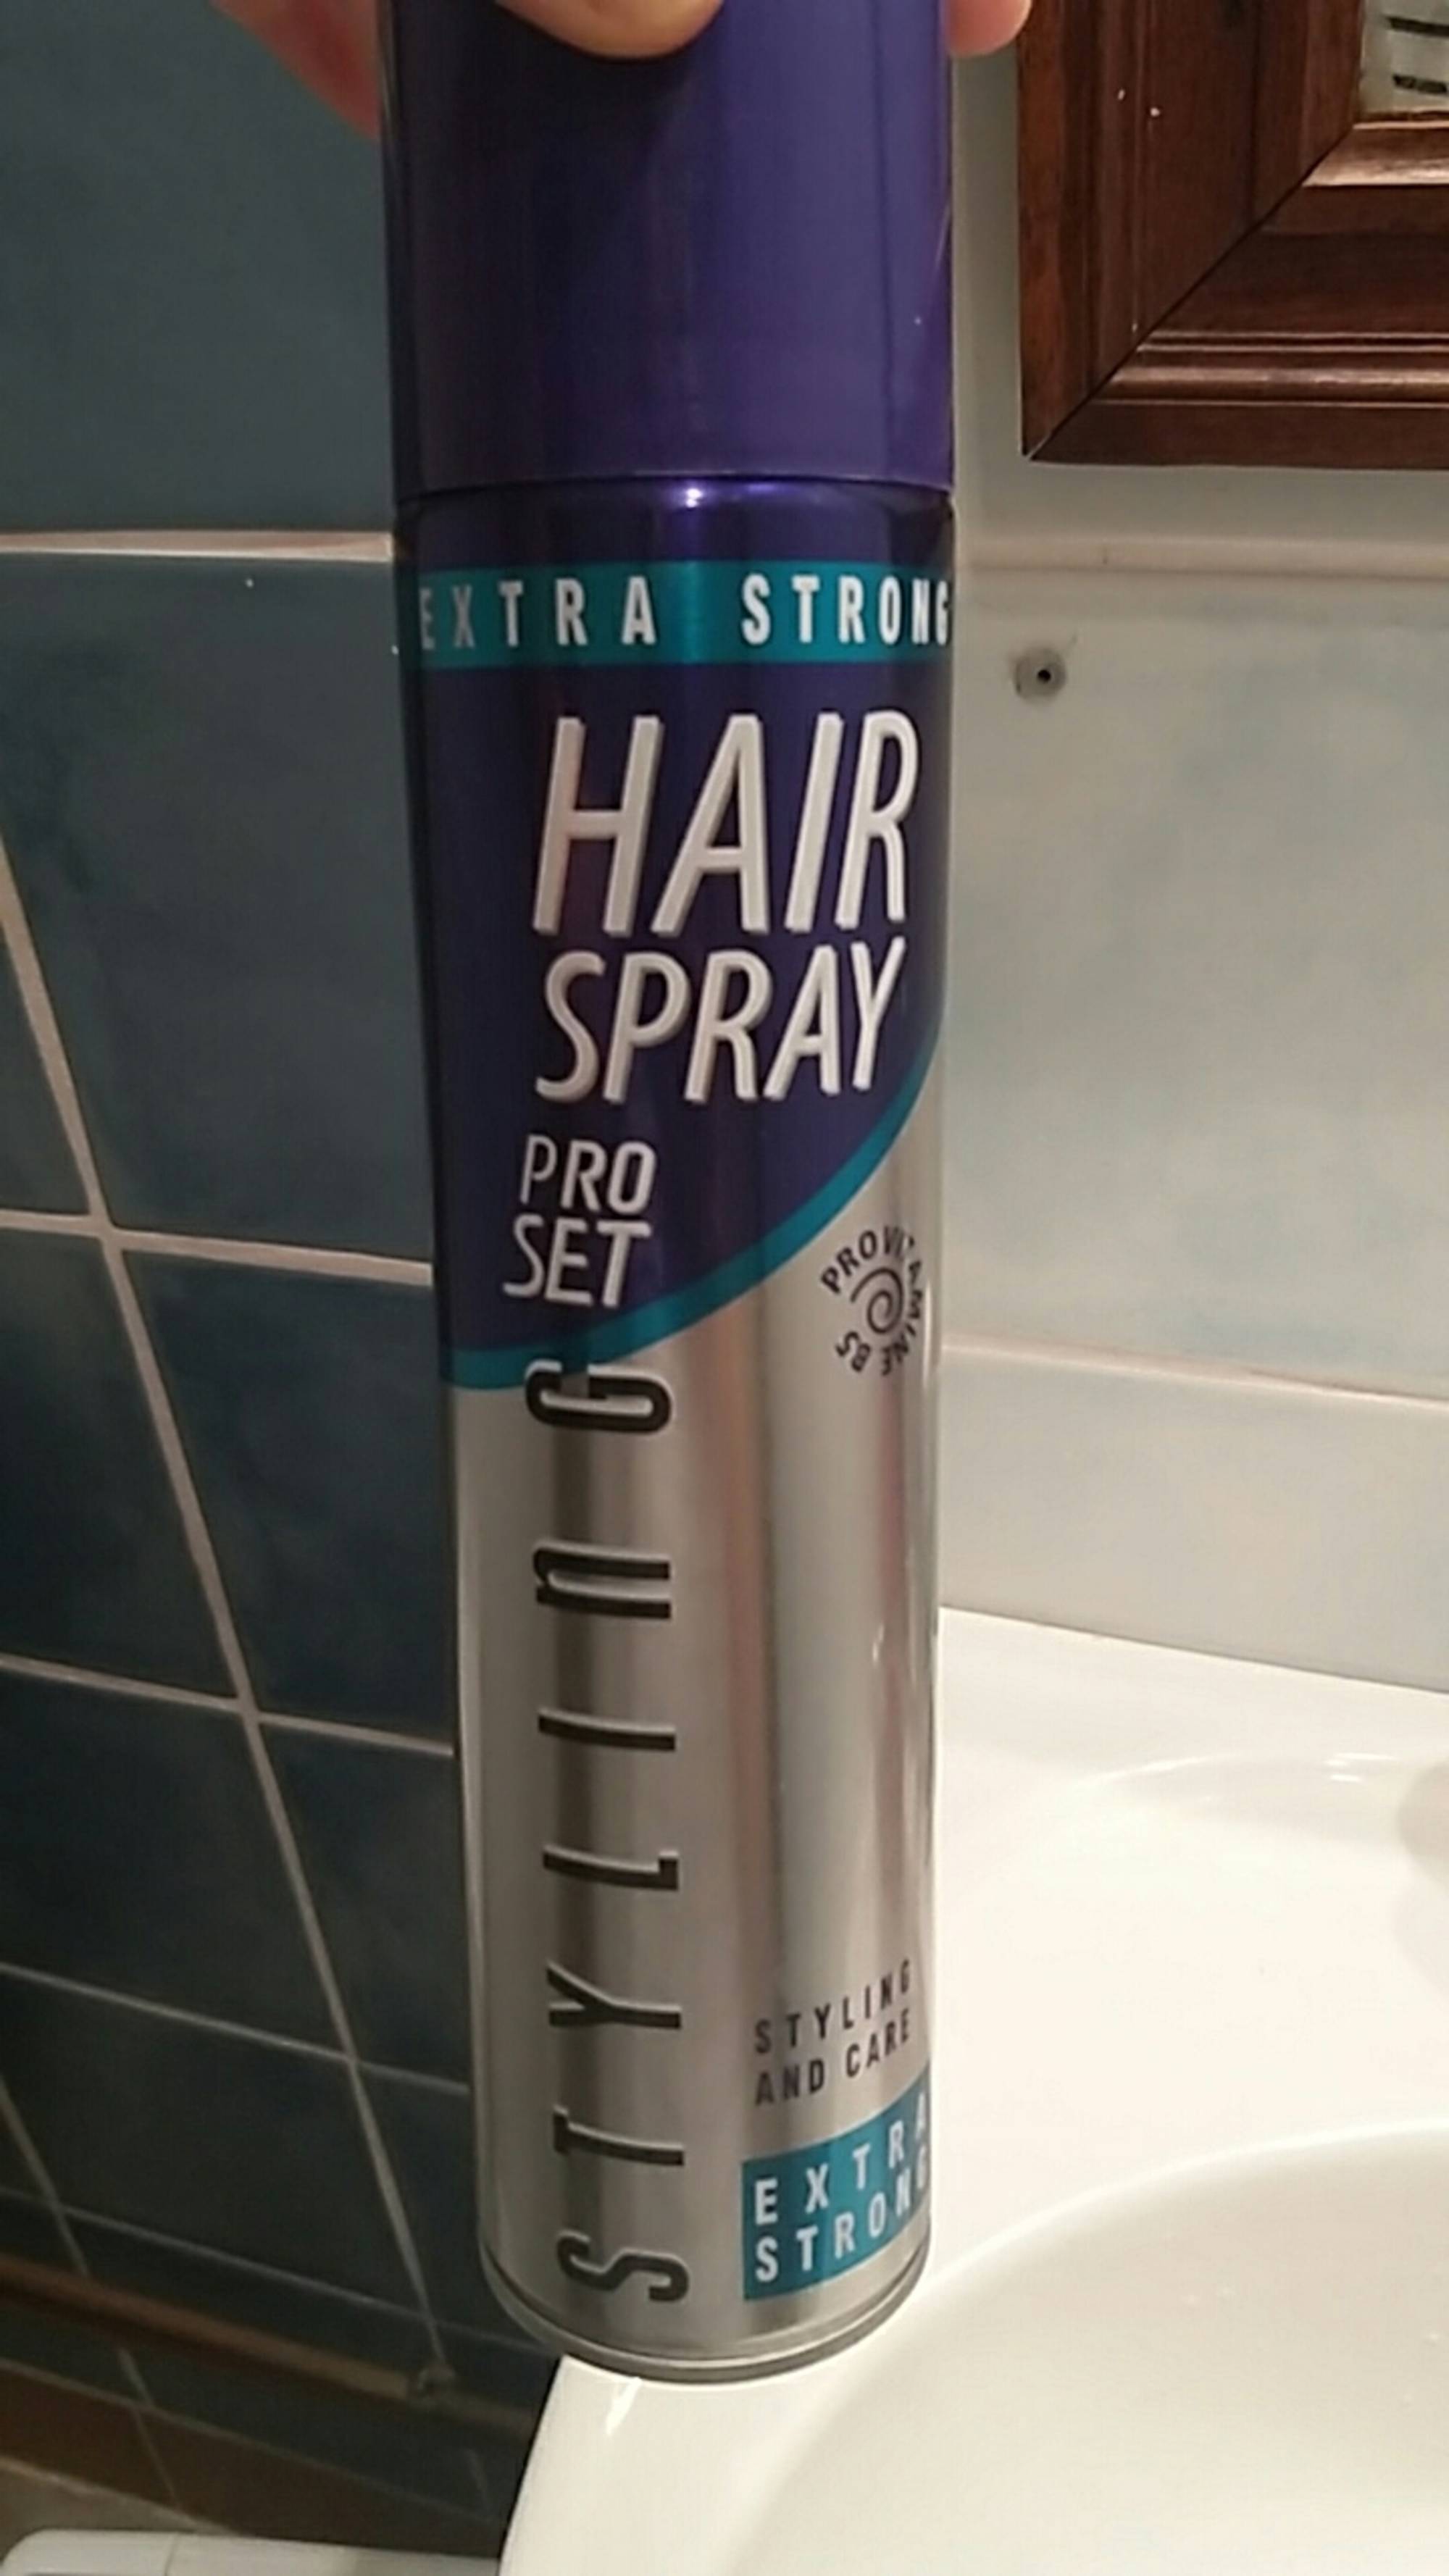 PROSET - Styling - Hair spray extra strong